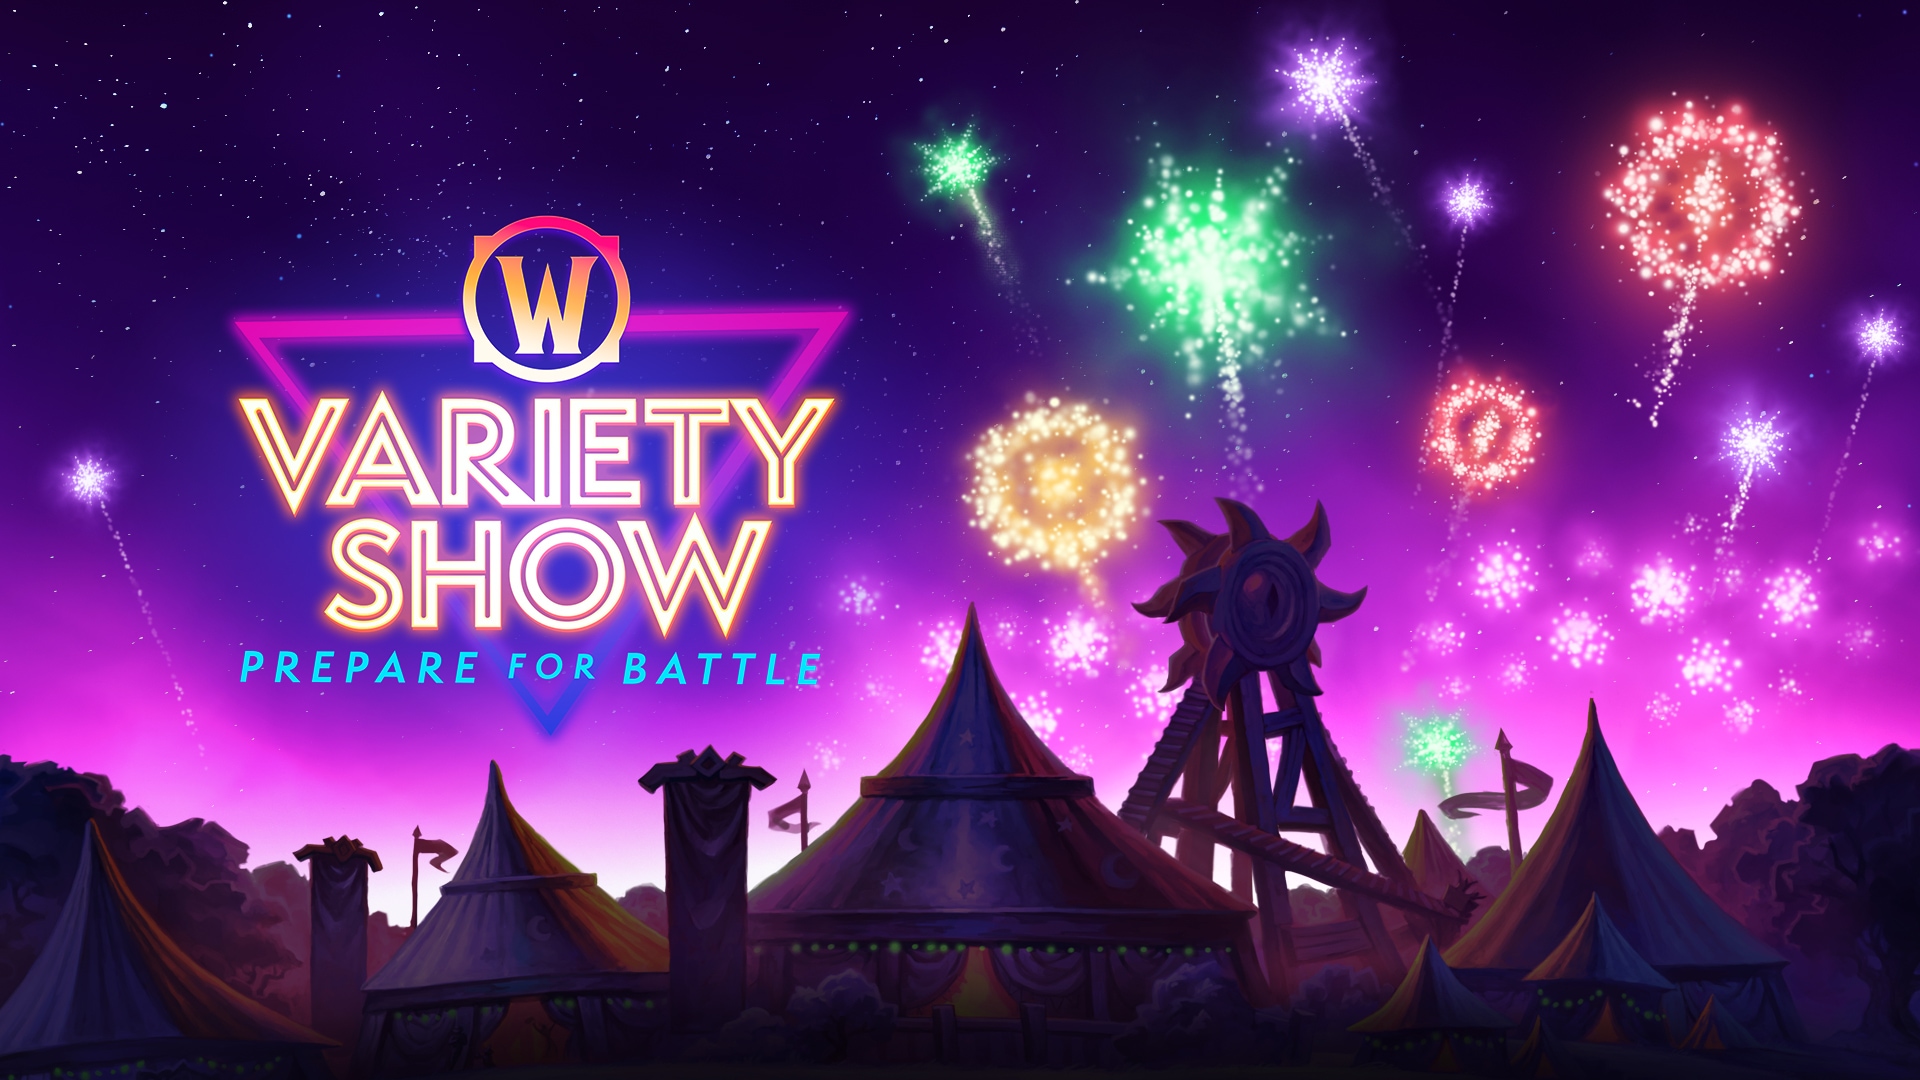 Introducing the WoW Variety Show!